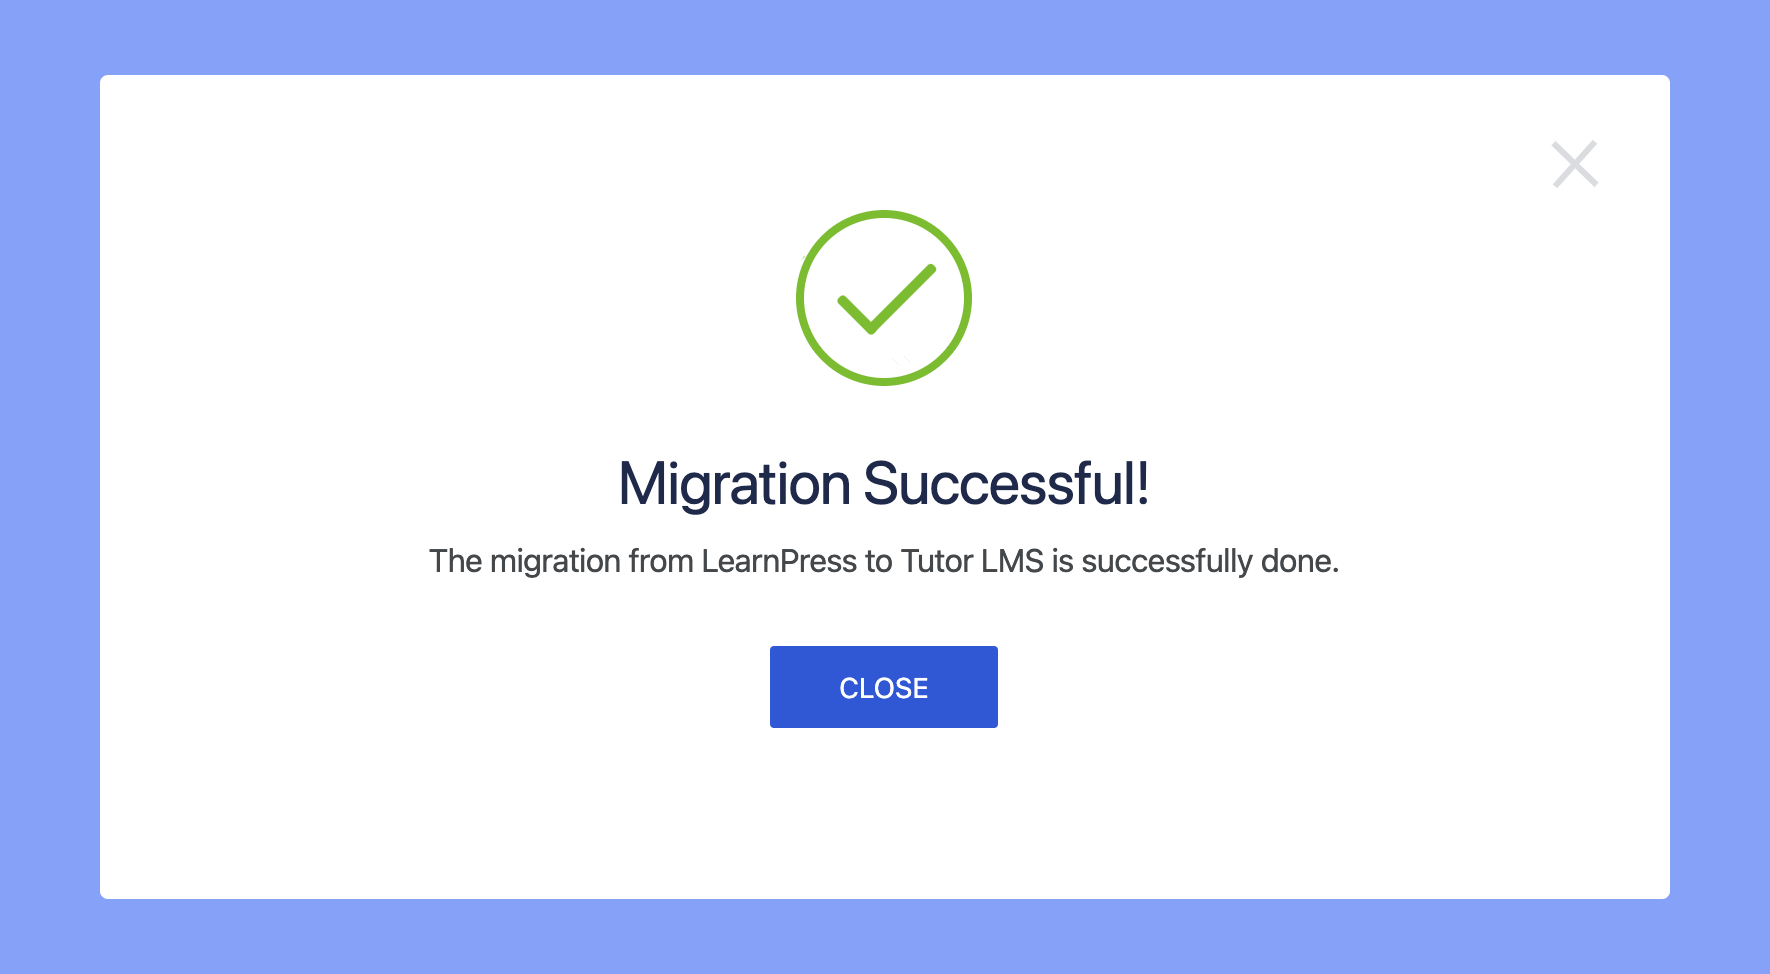 How to Migrate From LearnPress to Tutor LMS